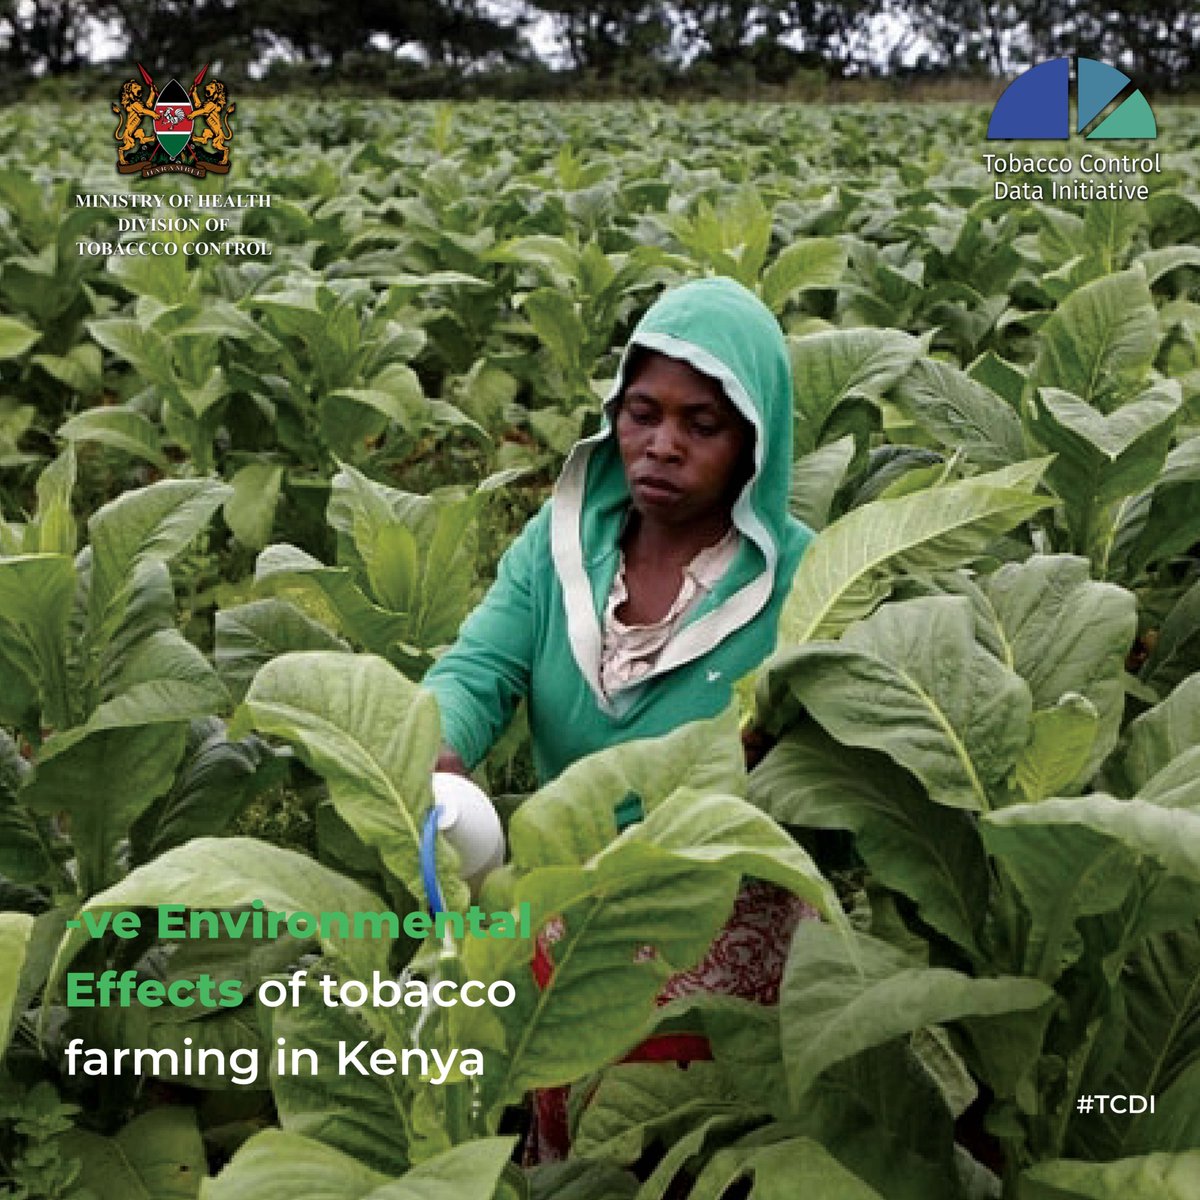 Let's raise awareness about the negative impacts of tobacco farming on the environment & work towards more sustainable practices!

For more #TobaccoControlData, look out for #TCDI being launched soon. This will revolutionize access to #TobaccoControl data🙌

#TobaccoFreeFarmsKE